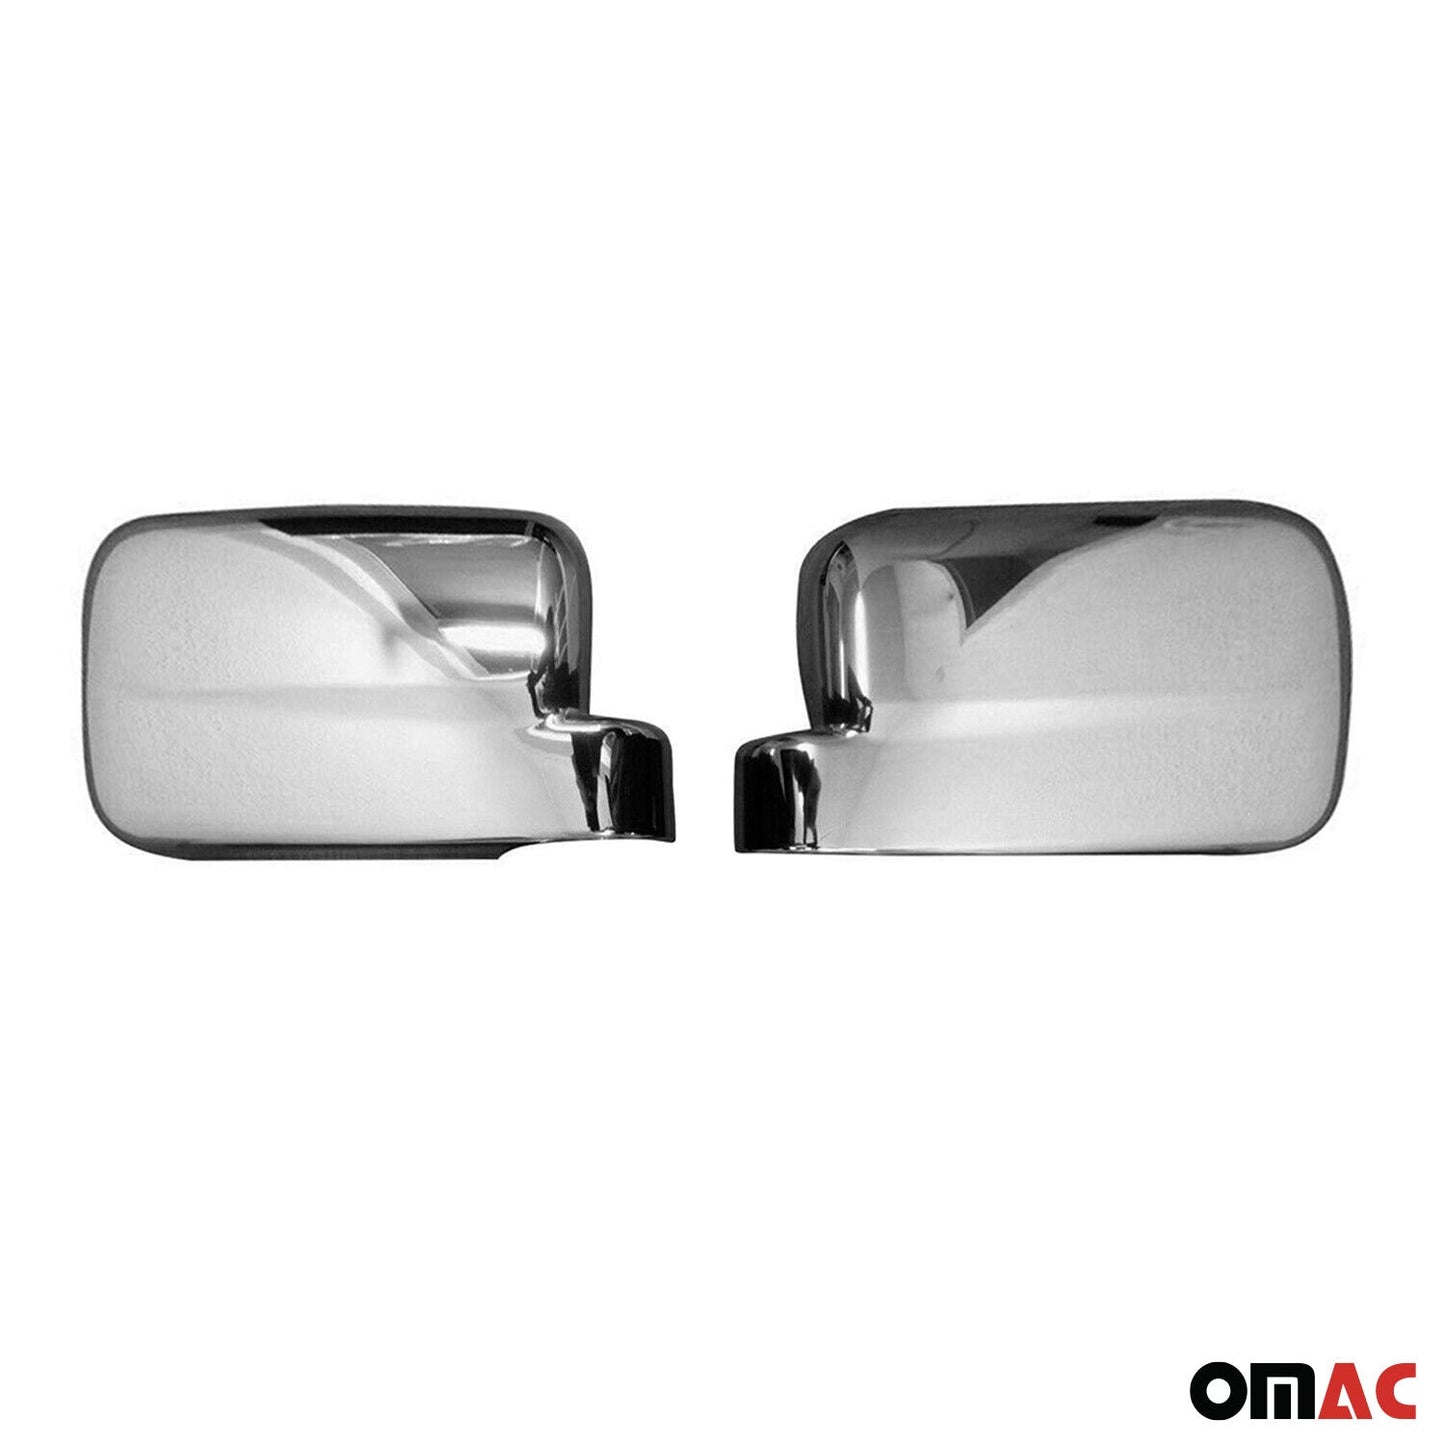 OMAC Mirror Cover Caps & Door Handle Chrome Set for Ford Transit Connect 2010-2013 G003330